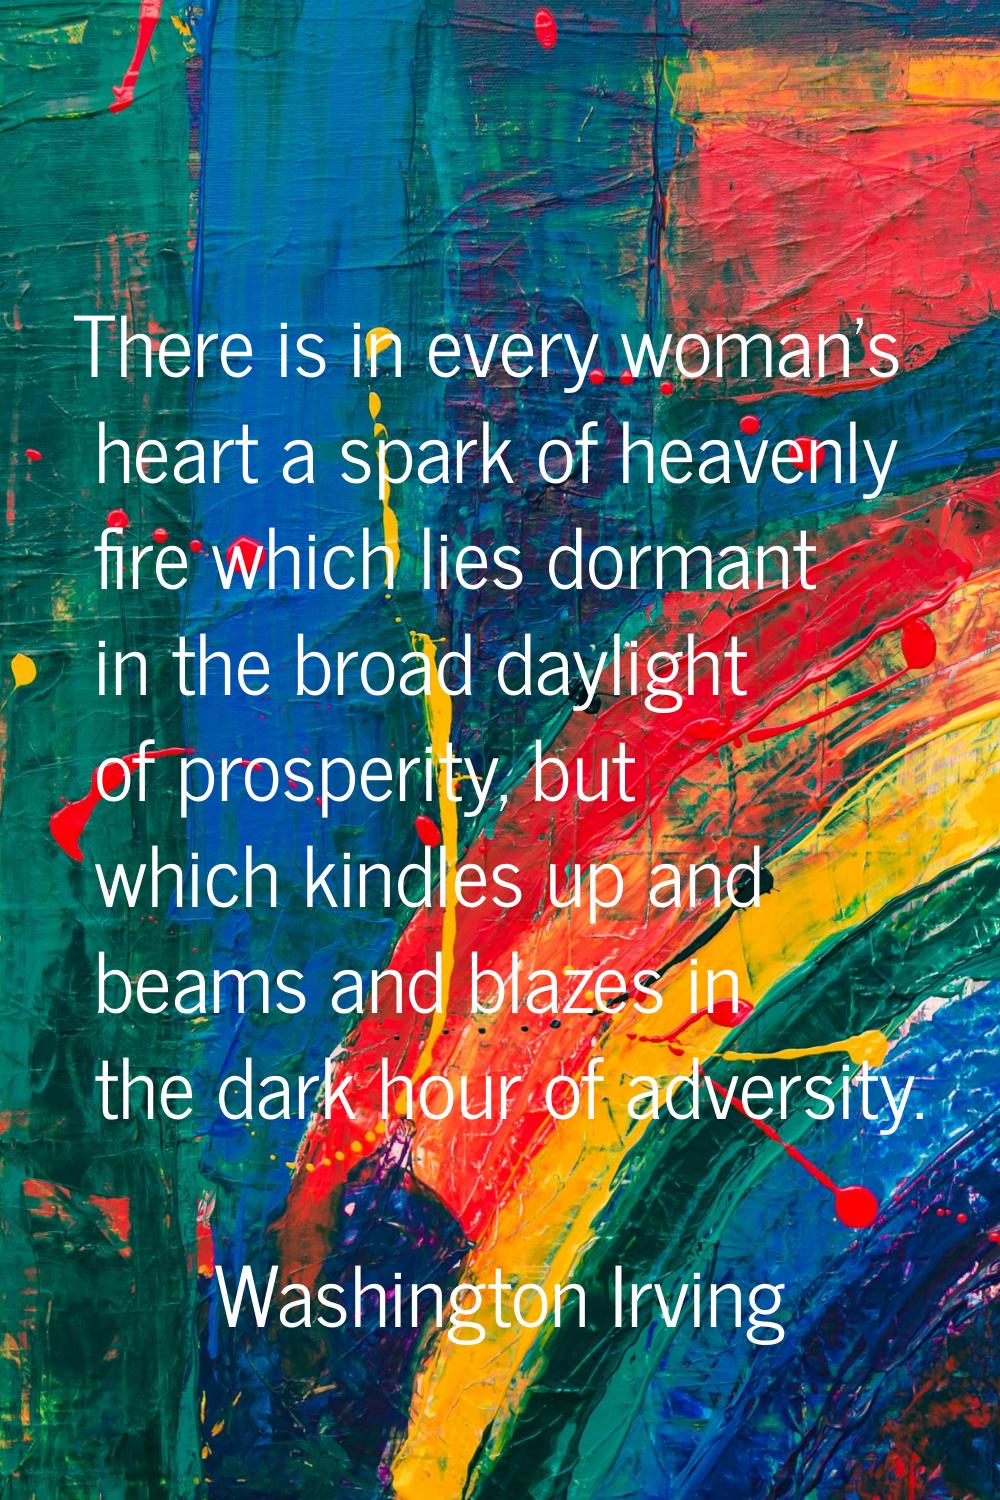 There is in every woman's heart a spark of heavenly fire which lies dormant in the broad daylight o